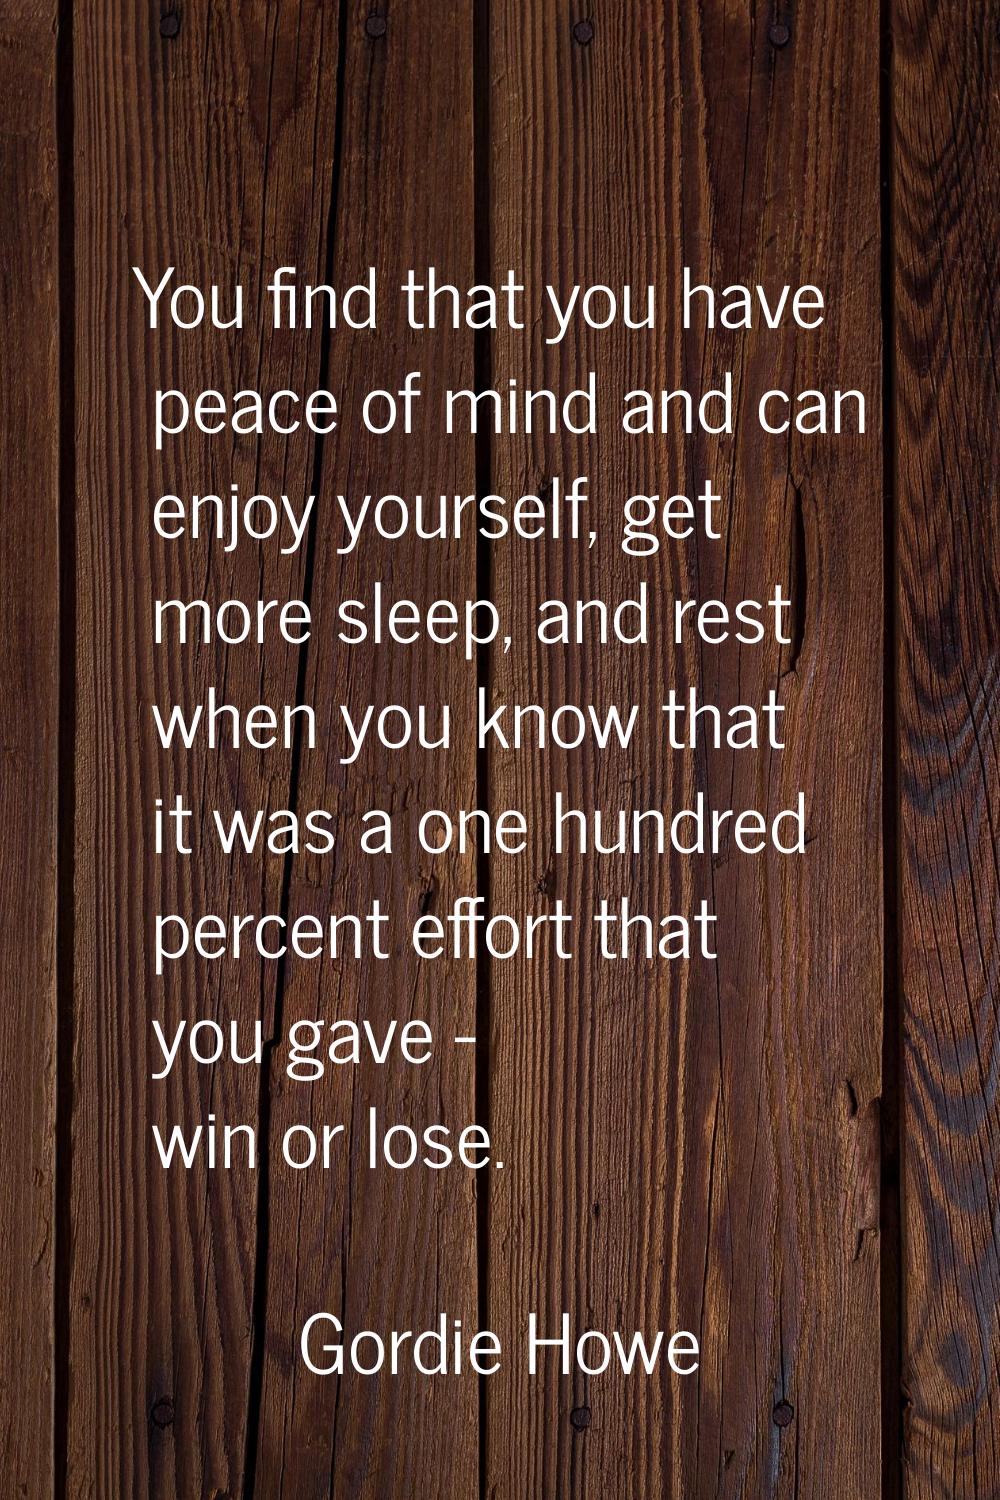 You find that you have peace of mind and can enjoy yourself, get more sleep, and rest when you know